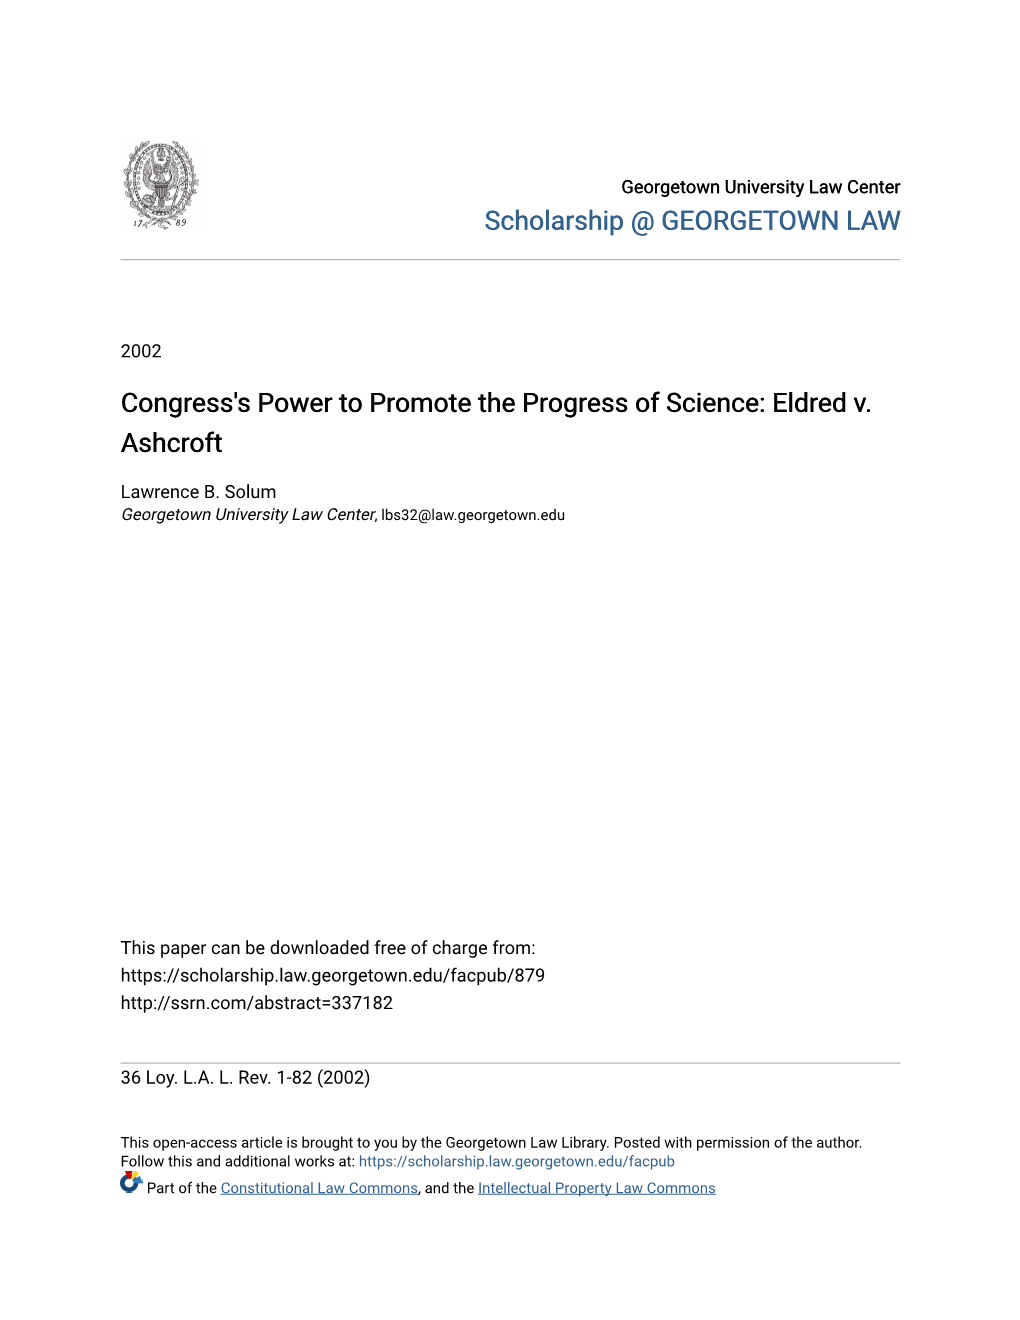 Congress's Power to Promote the Progress of Science: Eldred V. Ashcroft